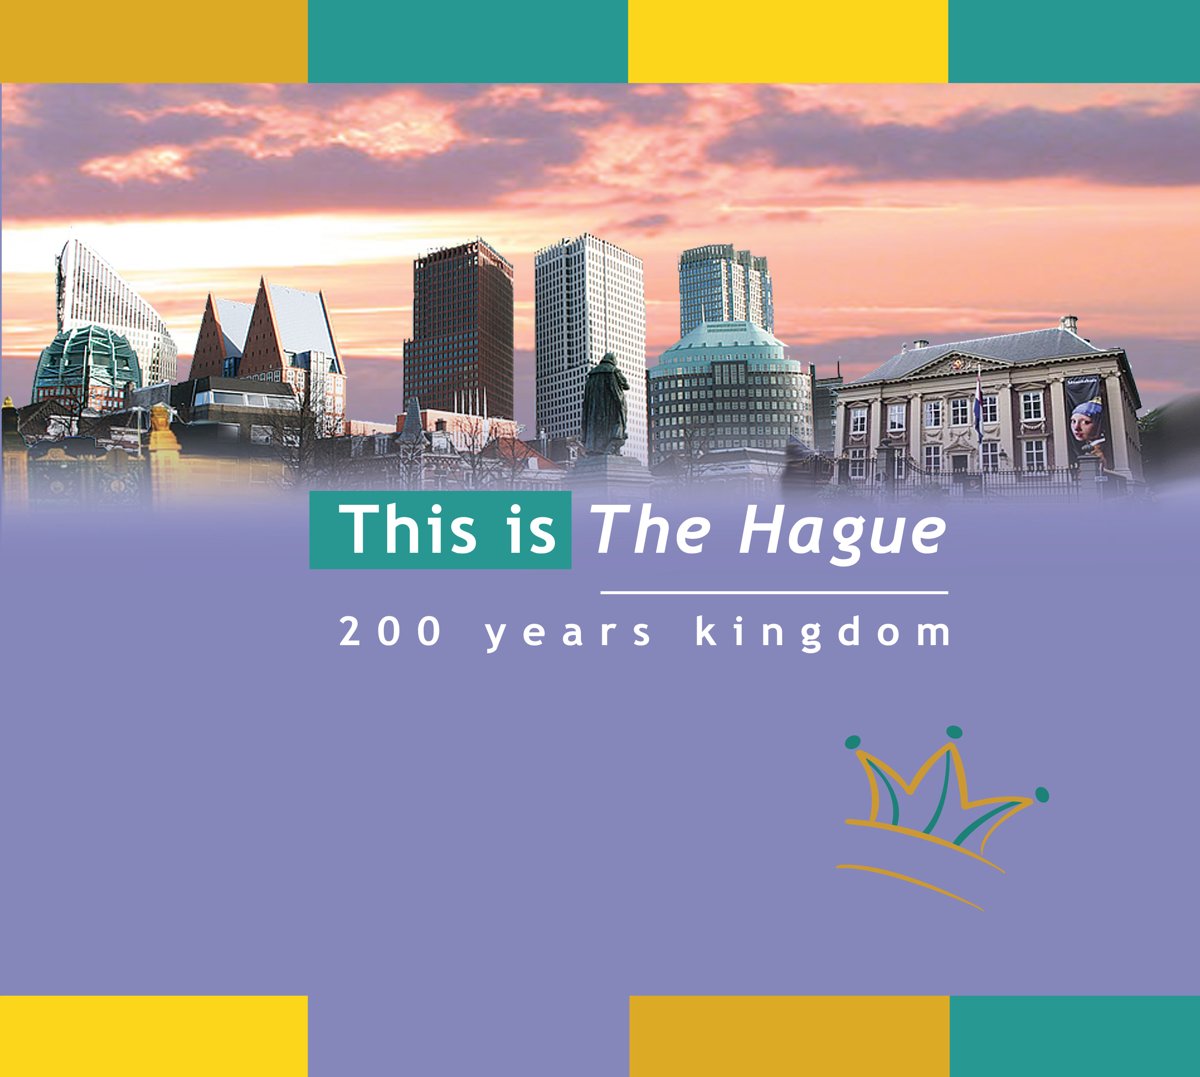 This is The Hague, 200 years Regency